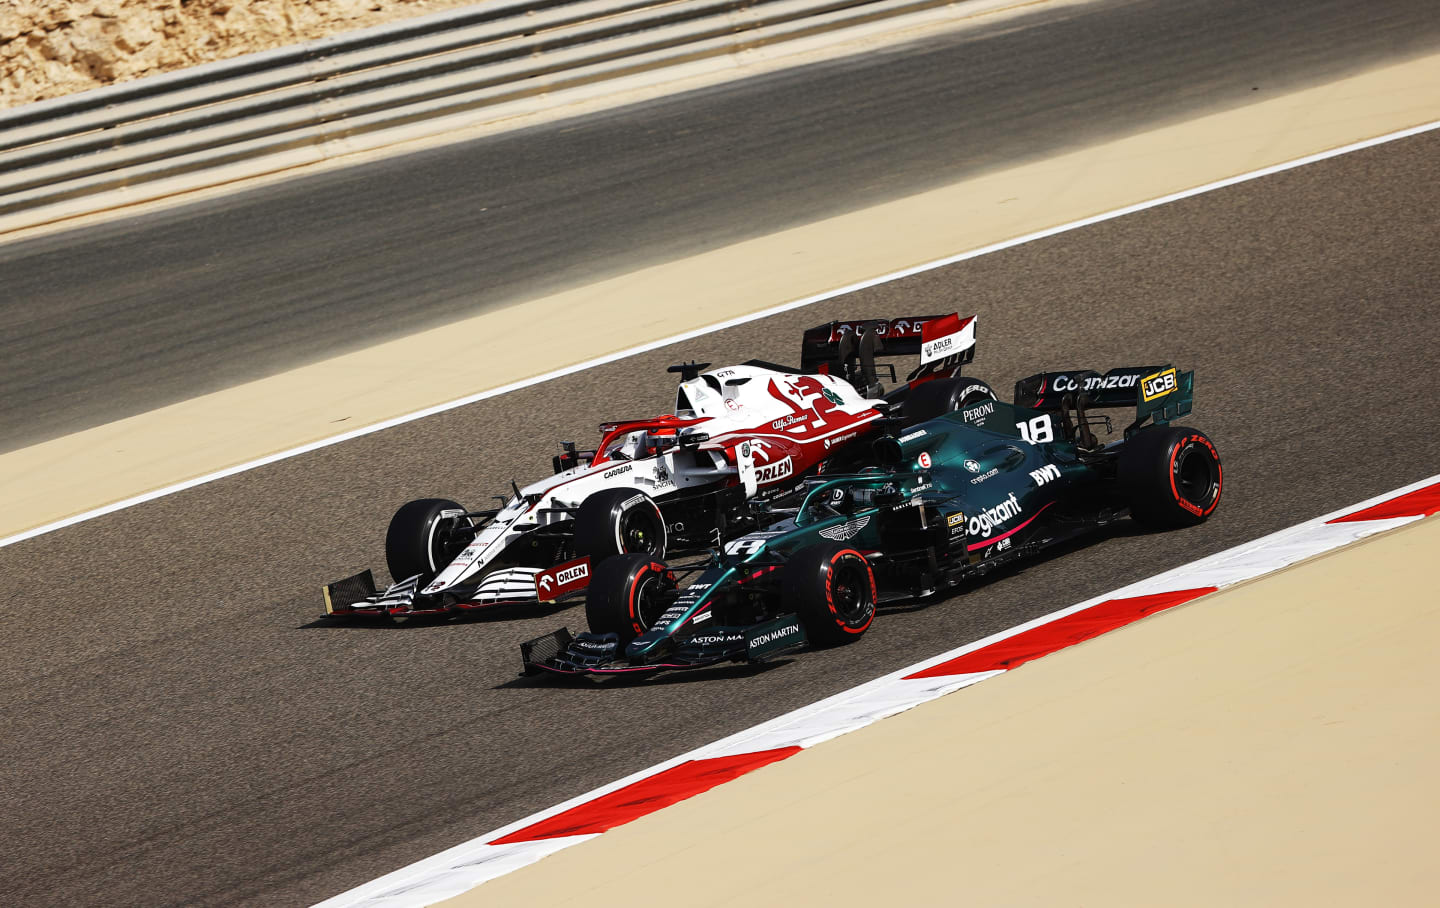 BAHRAIN, BAHRAIN - MARCH 26: Kimi Raikkonen of Finland driving the (7) Alfa Romeo Racing C41 Ferrari and Lance Stroll of Canada driving the (18) Aston Martin AMR21 Mercedes drive on track during practice ahead of the F1 Grand Prix of Bahrain at Bahrain International Circuit on March 26, 2021 in Bahrain, Bahrain. (Photo by Bryn Lennon/Getty Images)